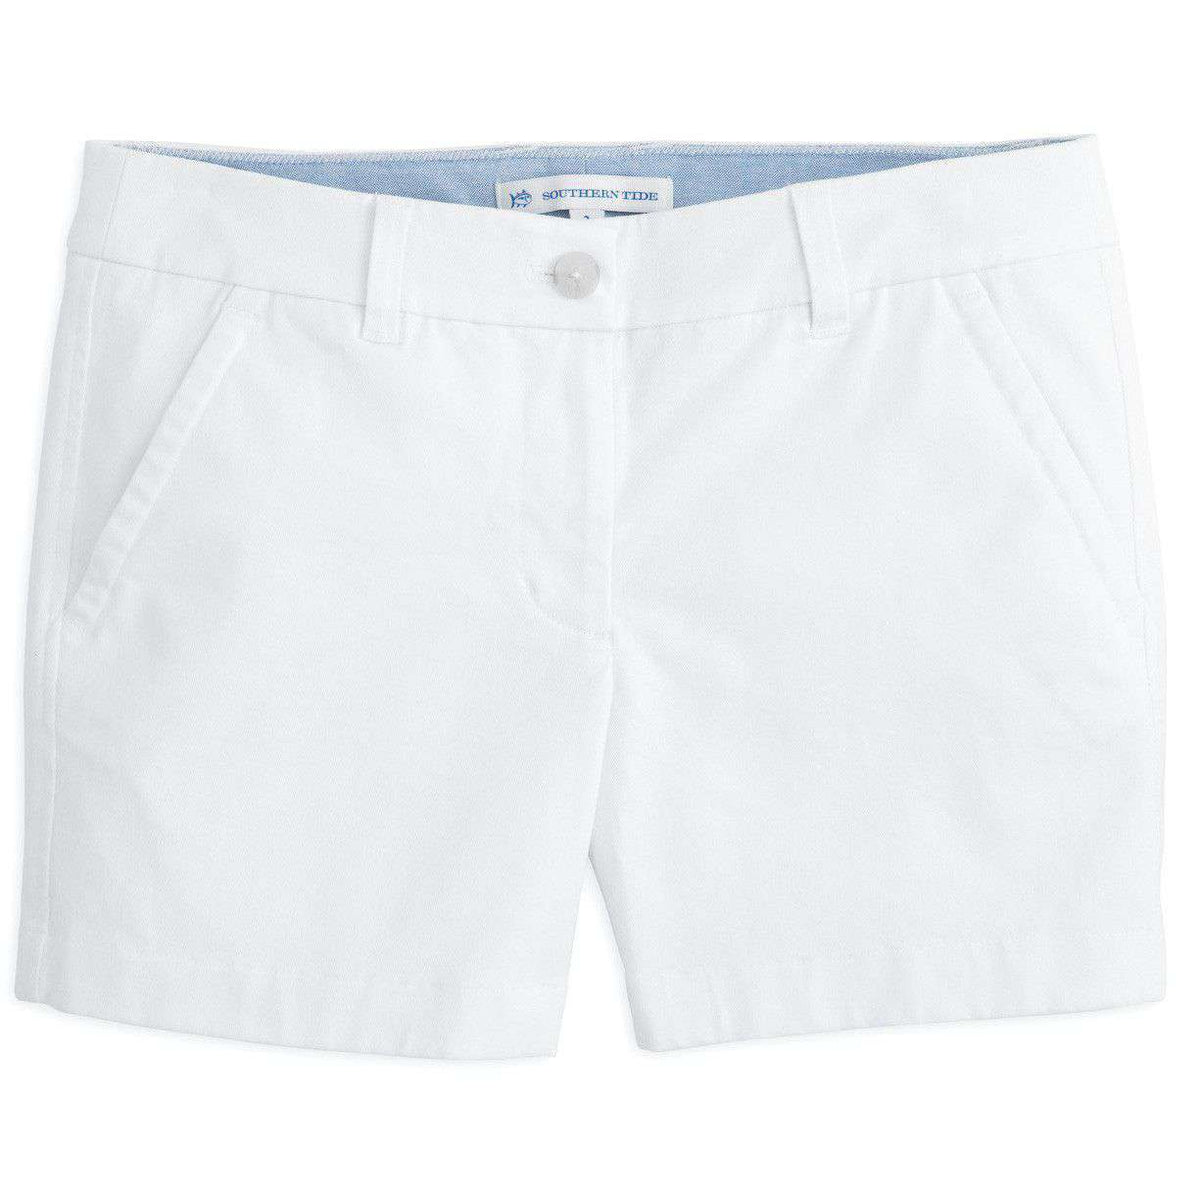 5" Caroline Short in Classic White by Southern Tide - Country Club Prep